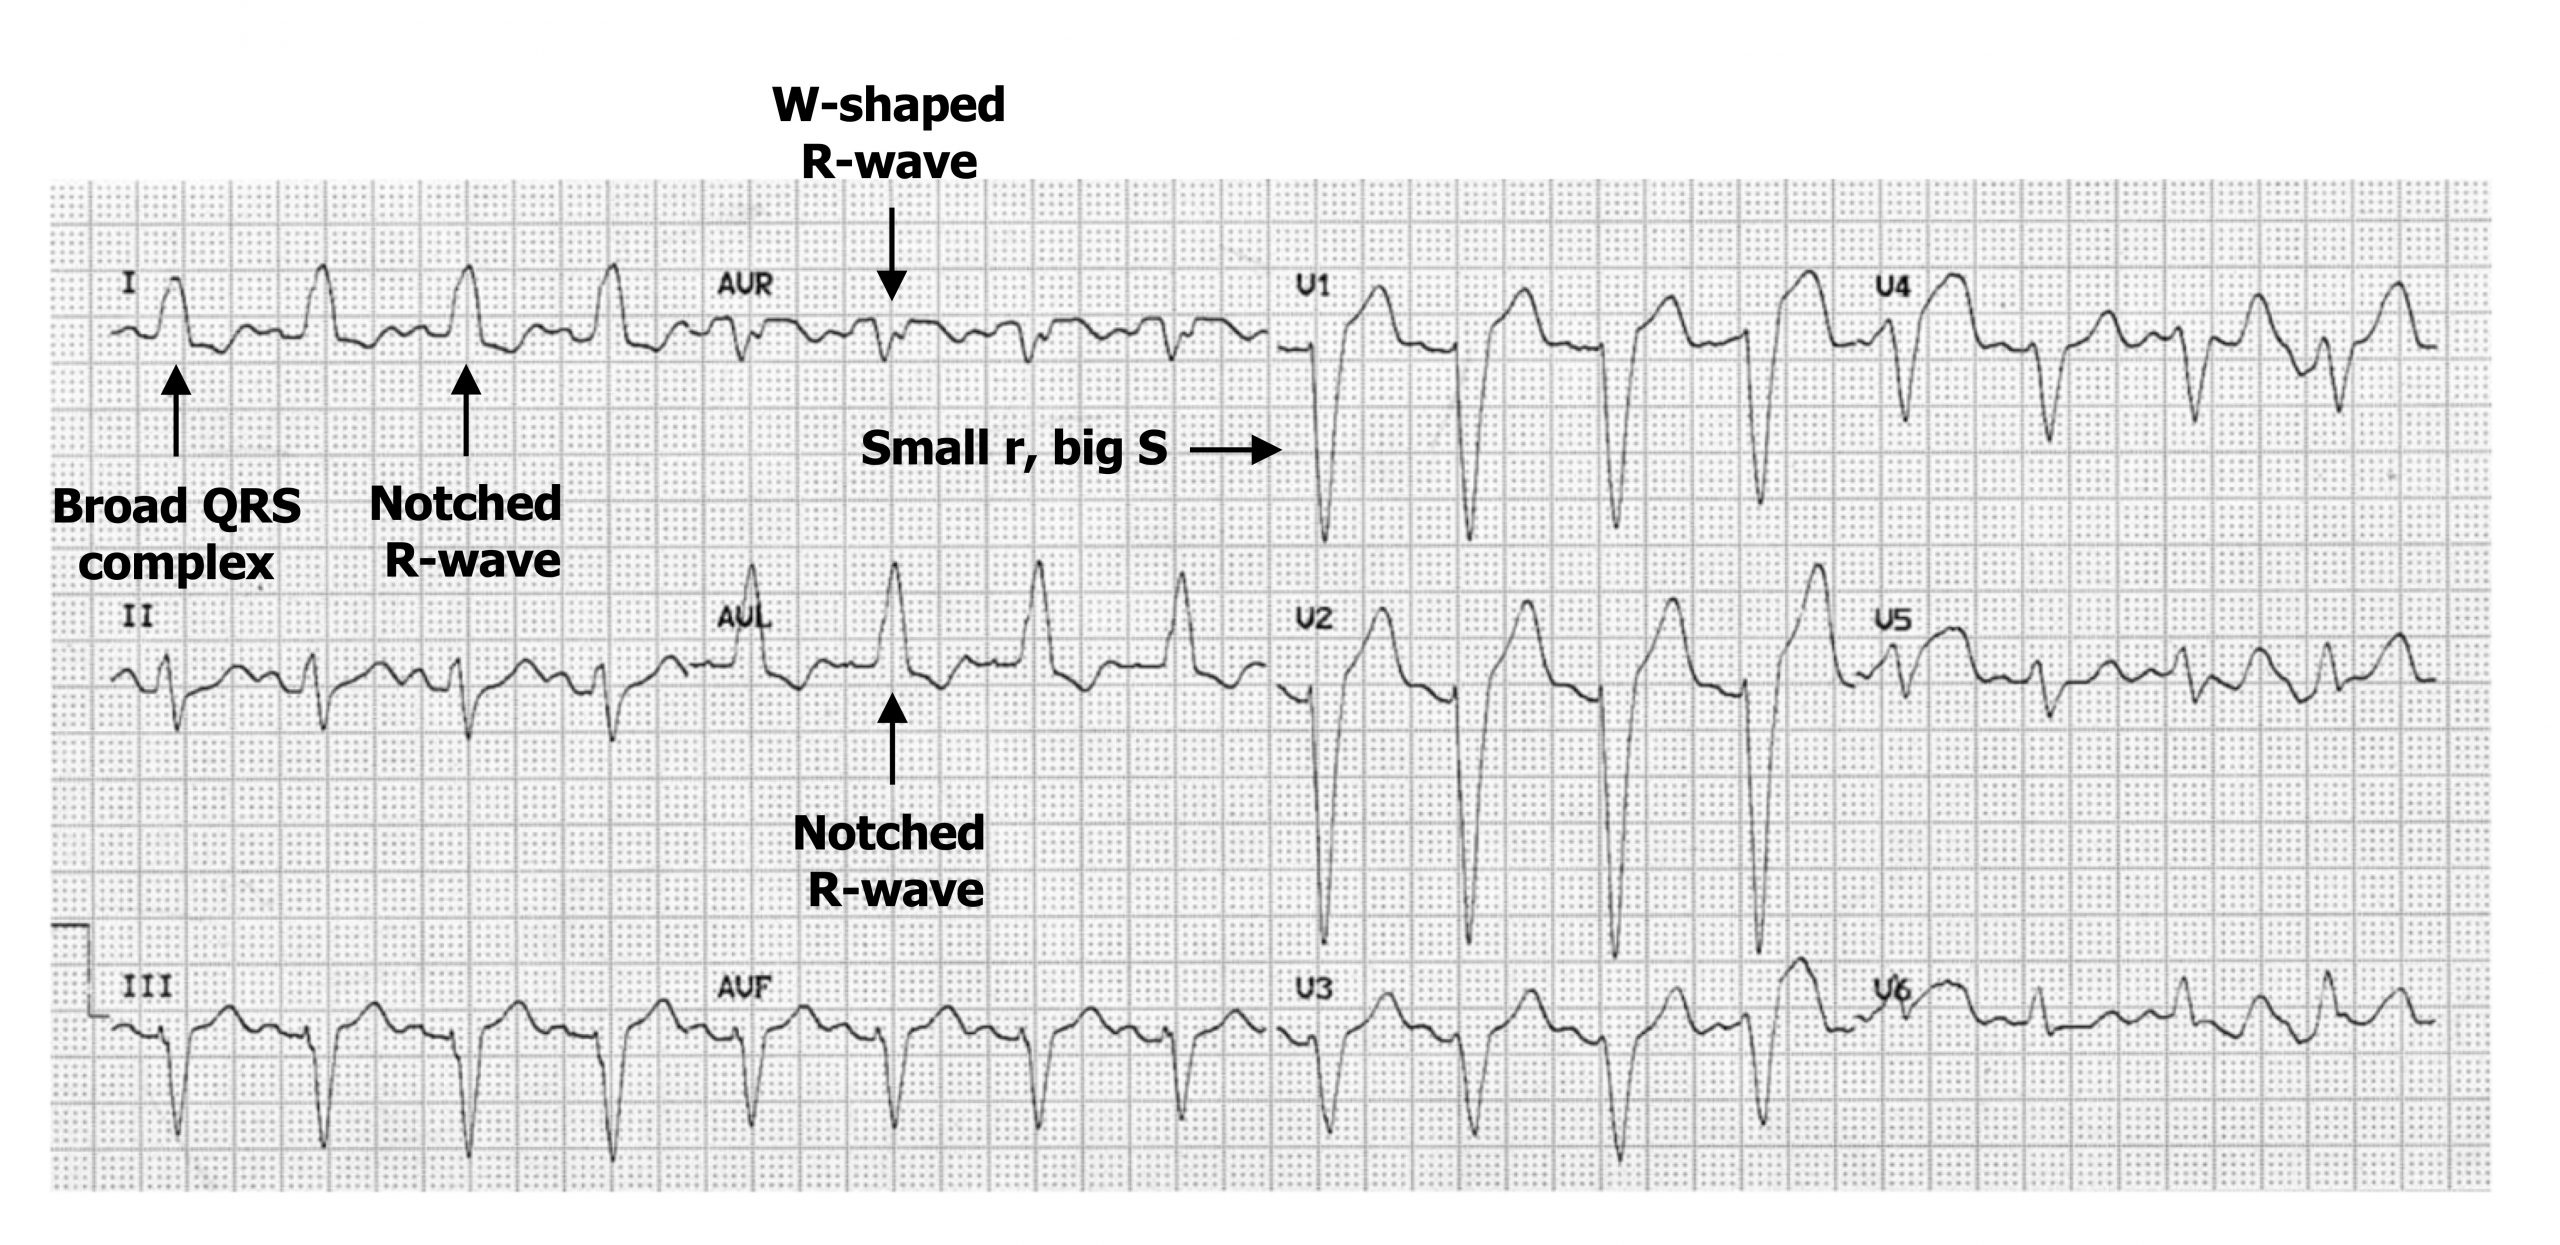 The image shows a 12-lead ECG print out depicting an example of left bundle branch block. Lead 1 tracing shows broadened QRS complexes and the R-wave appears to be notched with a peak followed by another peak. A similar double peaking is seen in the R-waves in the tracing from the AVR lead. As the R-wave is negative in this lead the double peaking makes a W like shape. The S-wave in leads V1 and V2 are negative and very large.